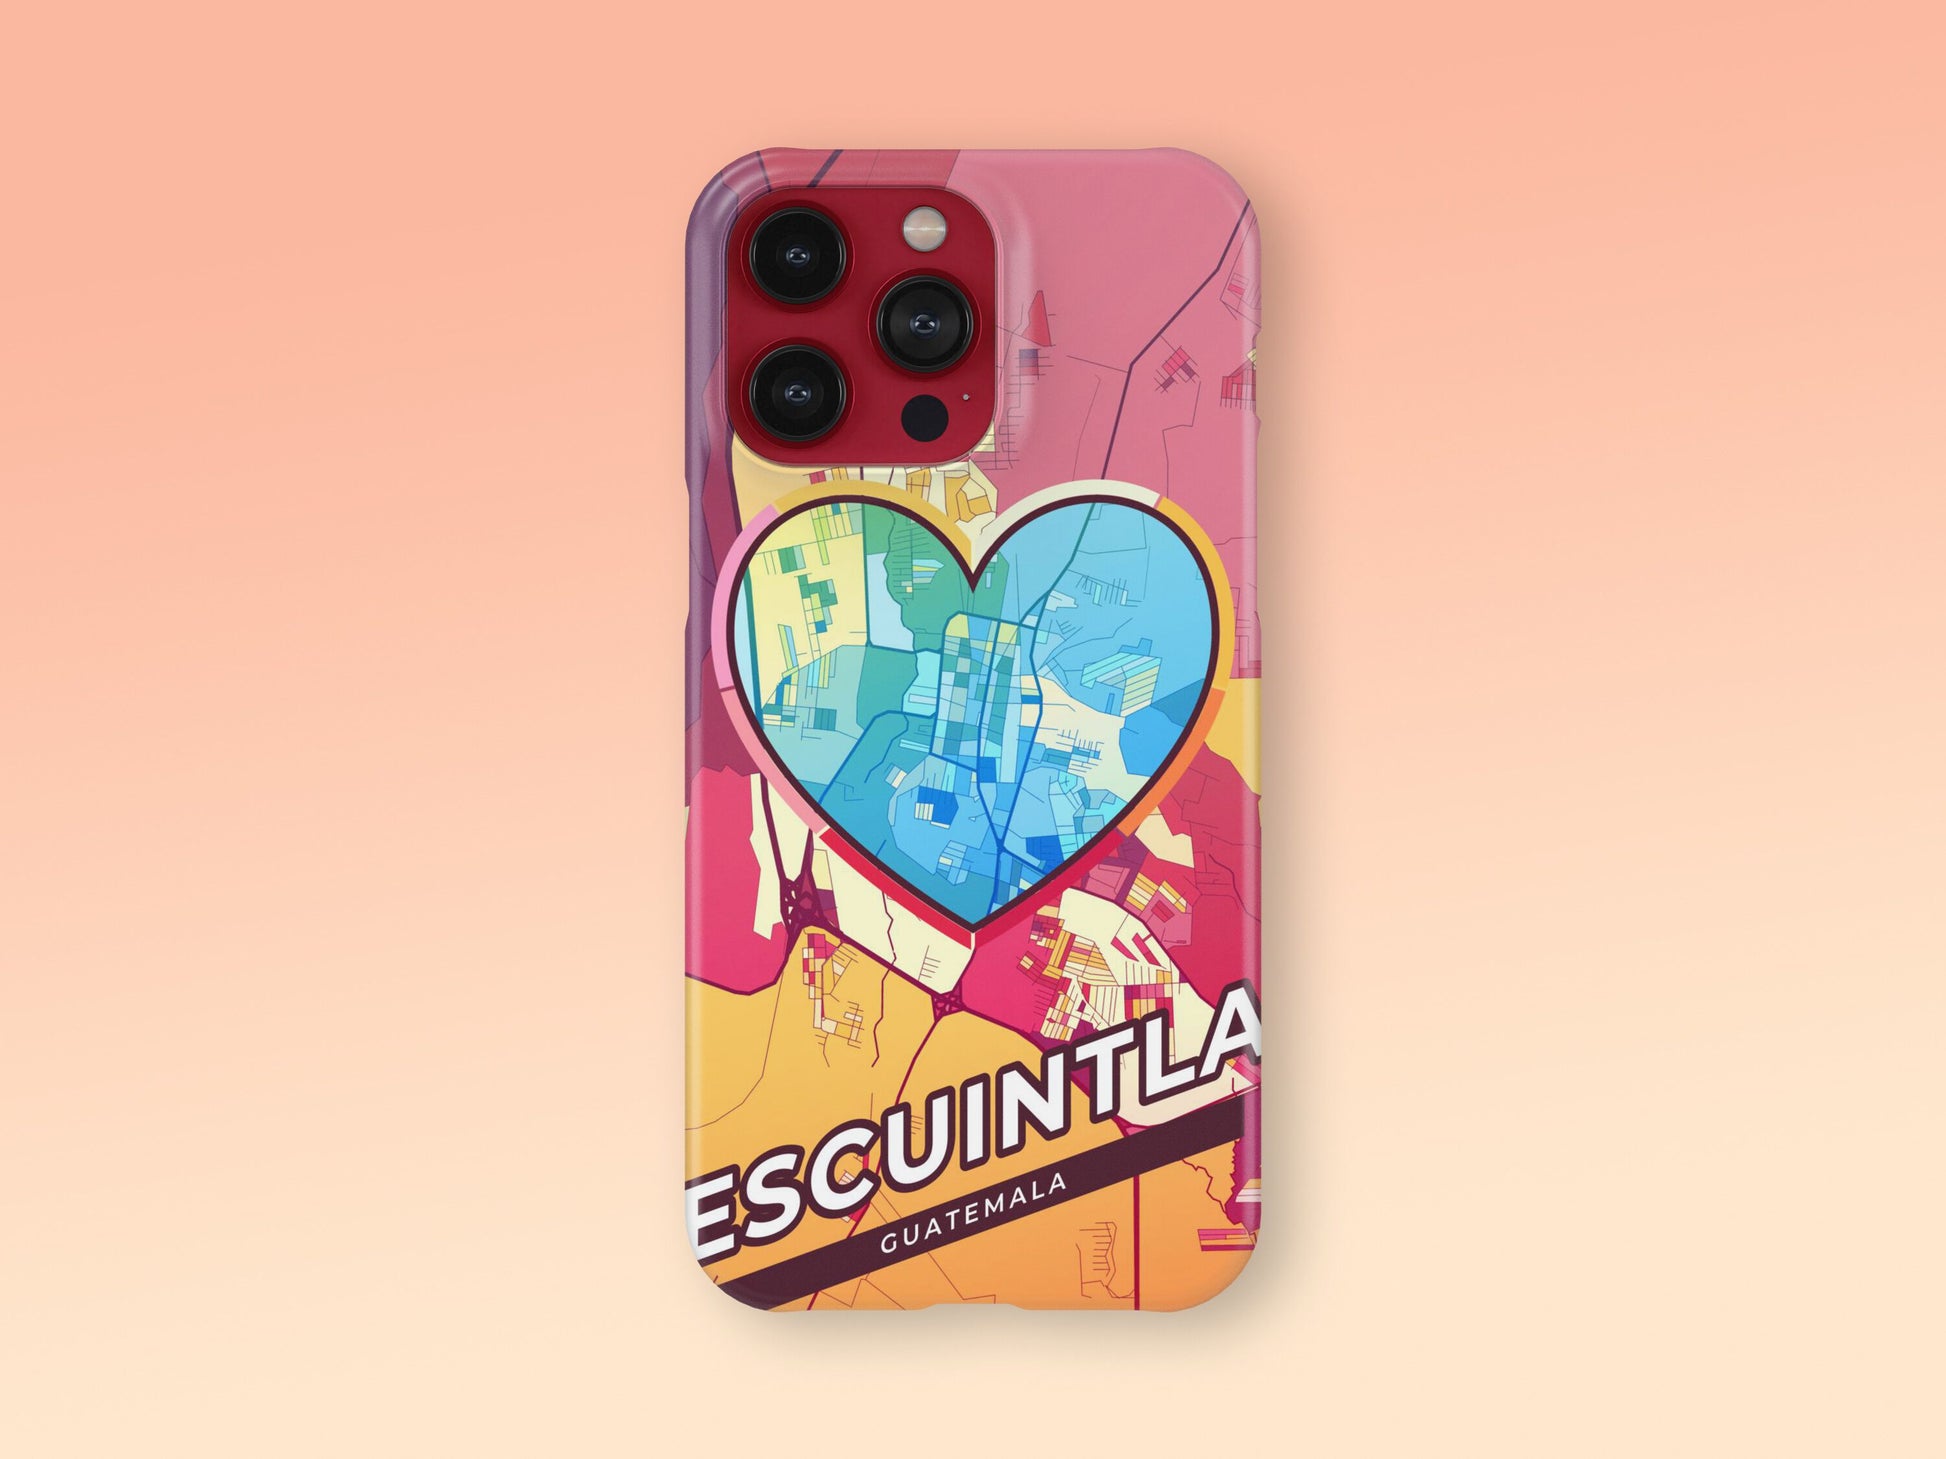 Escuintla Guatemala slim phone case with colorful icon. Birthday, wedding or housewarming gift. Couple match cases. 2